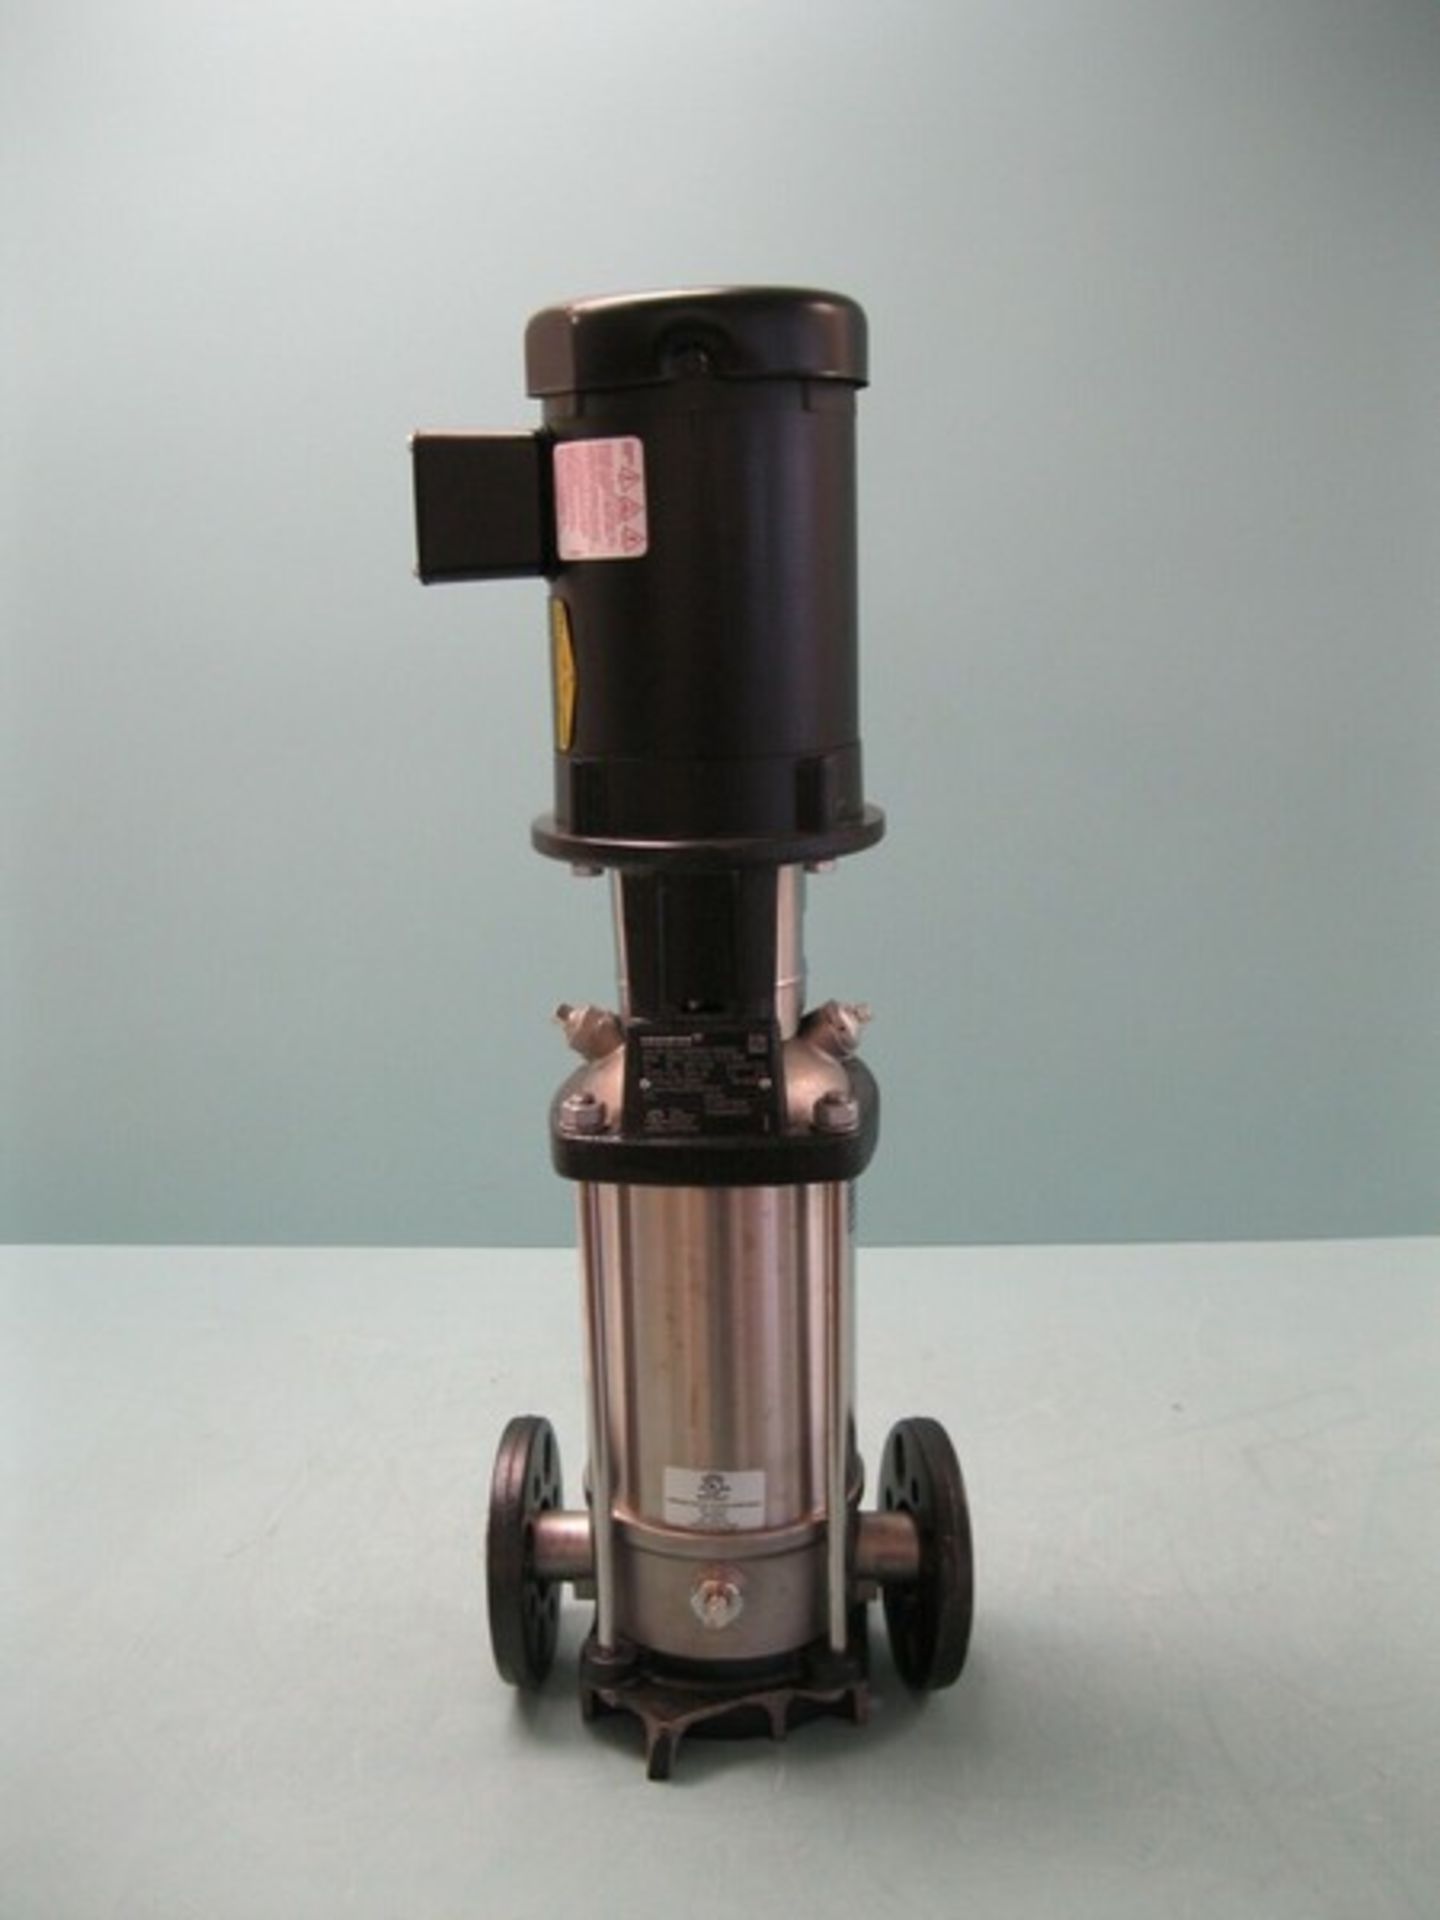 1" Grundfos CRN 1S-12 Centrifugal Pump DIN/ANSI/JIS 3/4 HP Motor AS IS (NOTE: Packing and